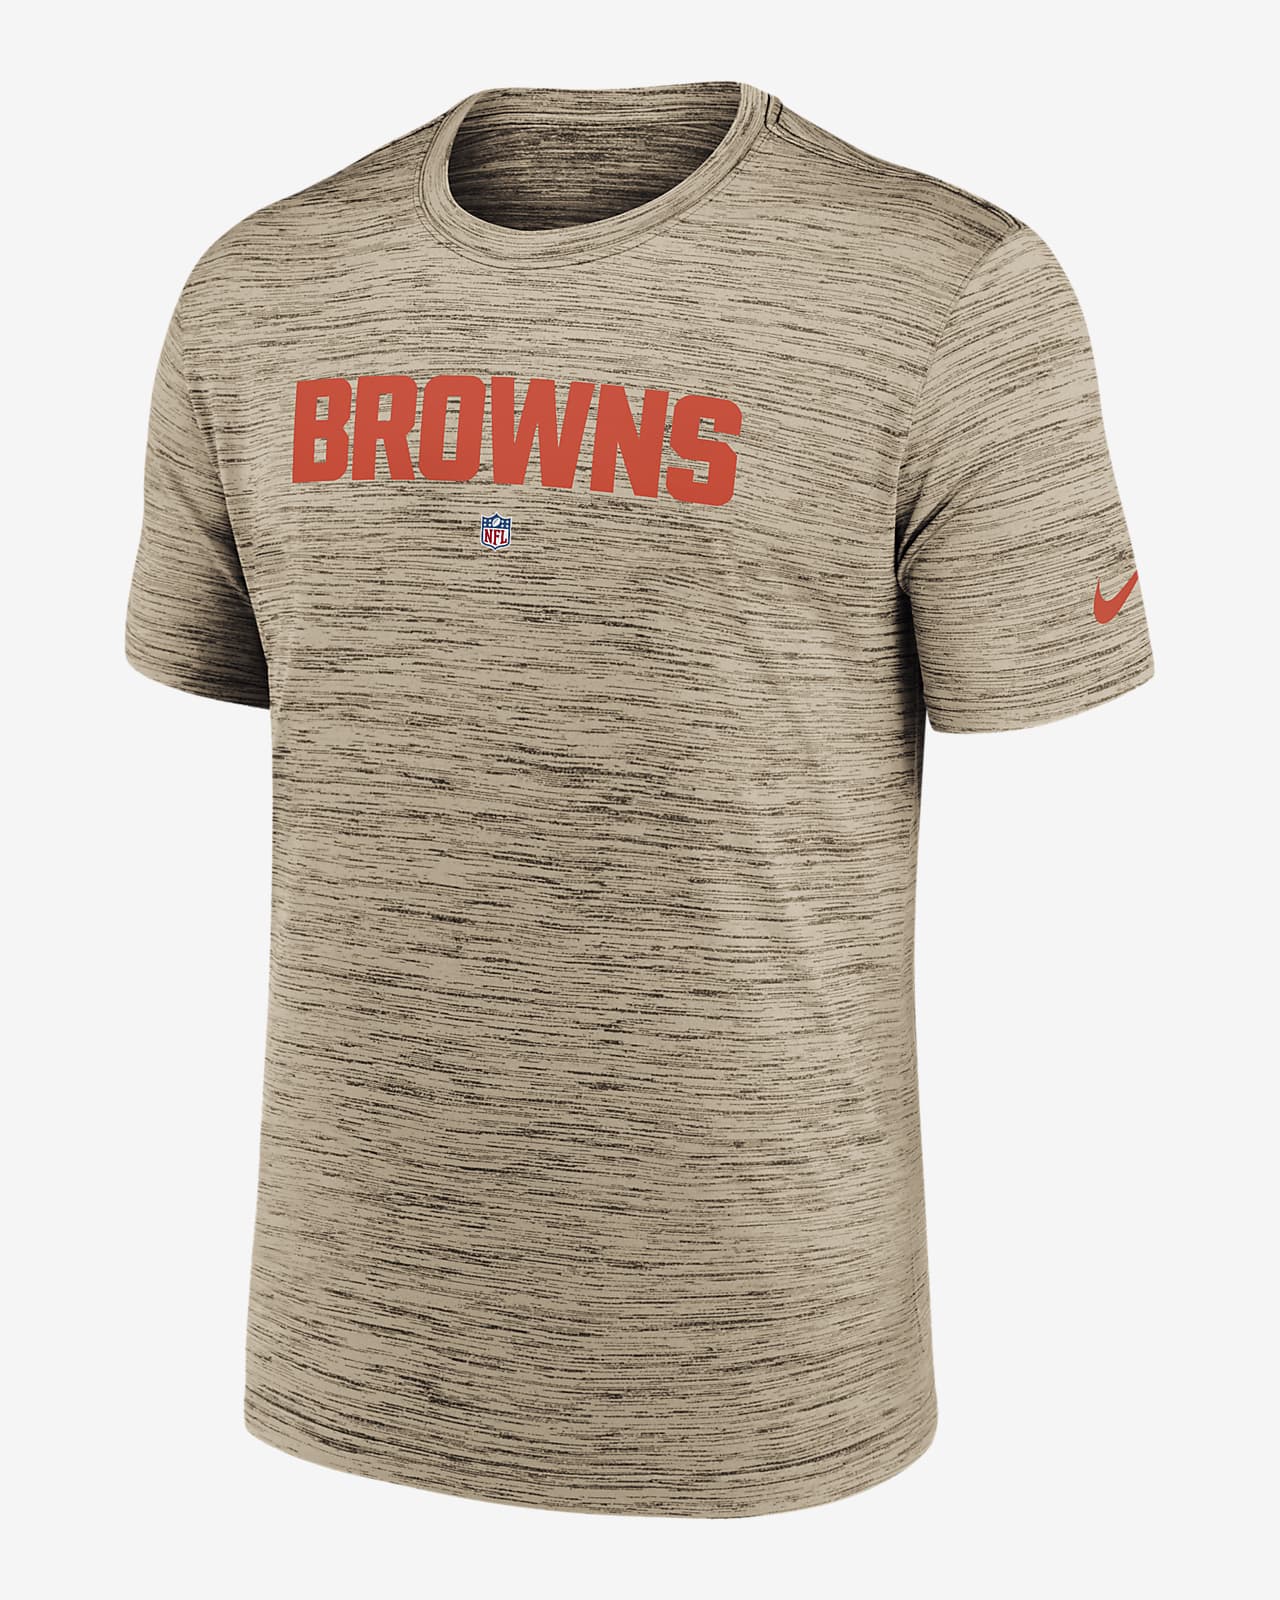 Nike Men's Cleveland Browns Sideline Velocity T-Shirt - Brown - L Each